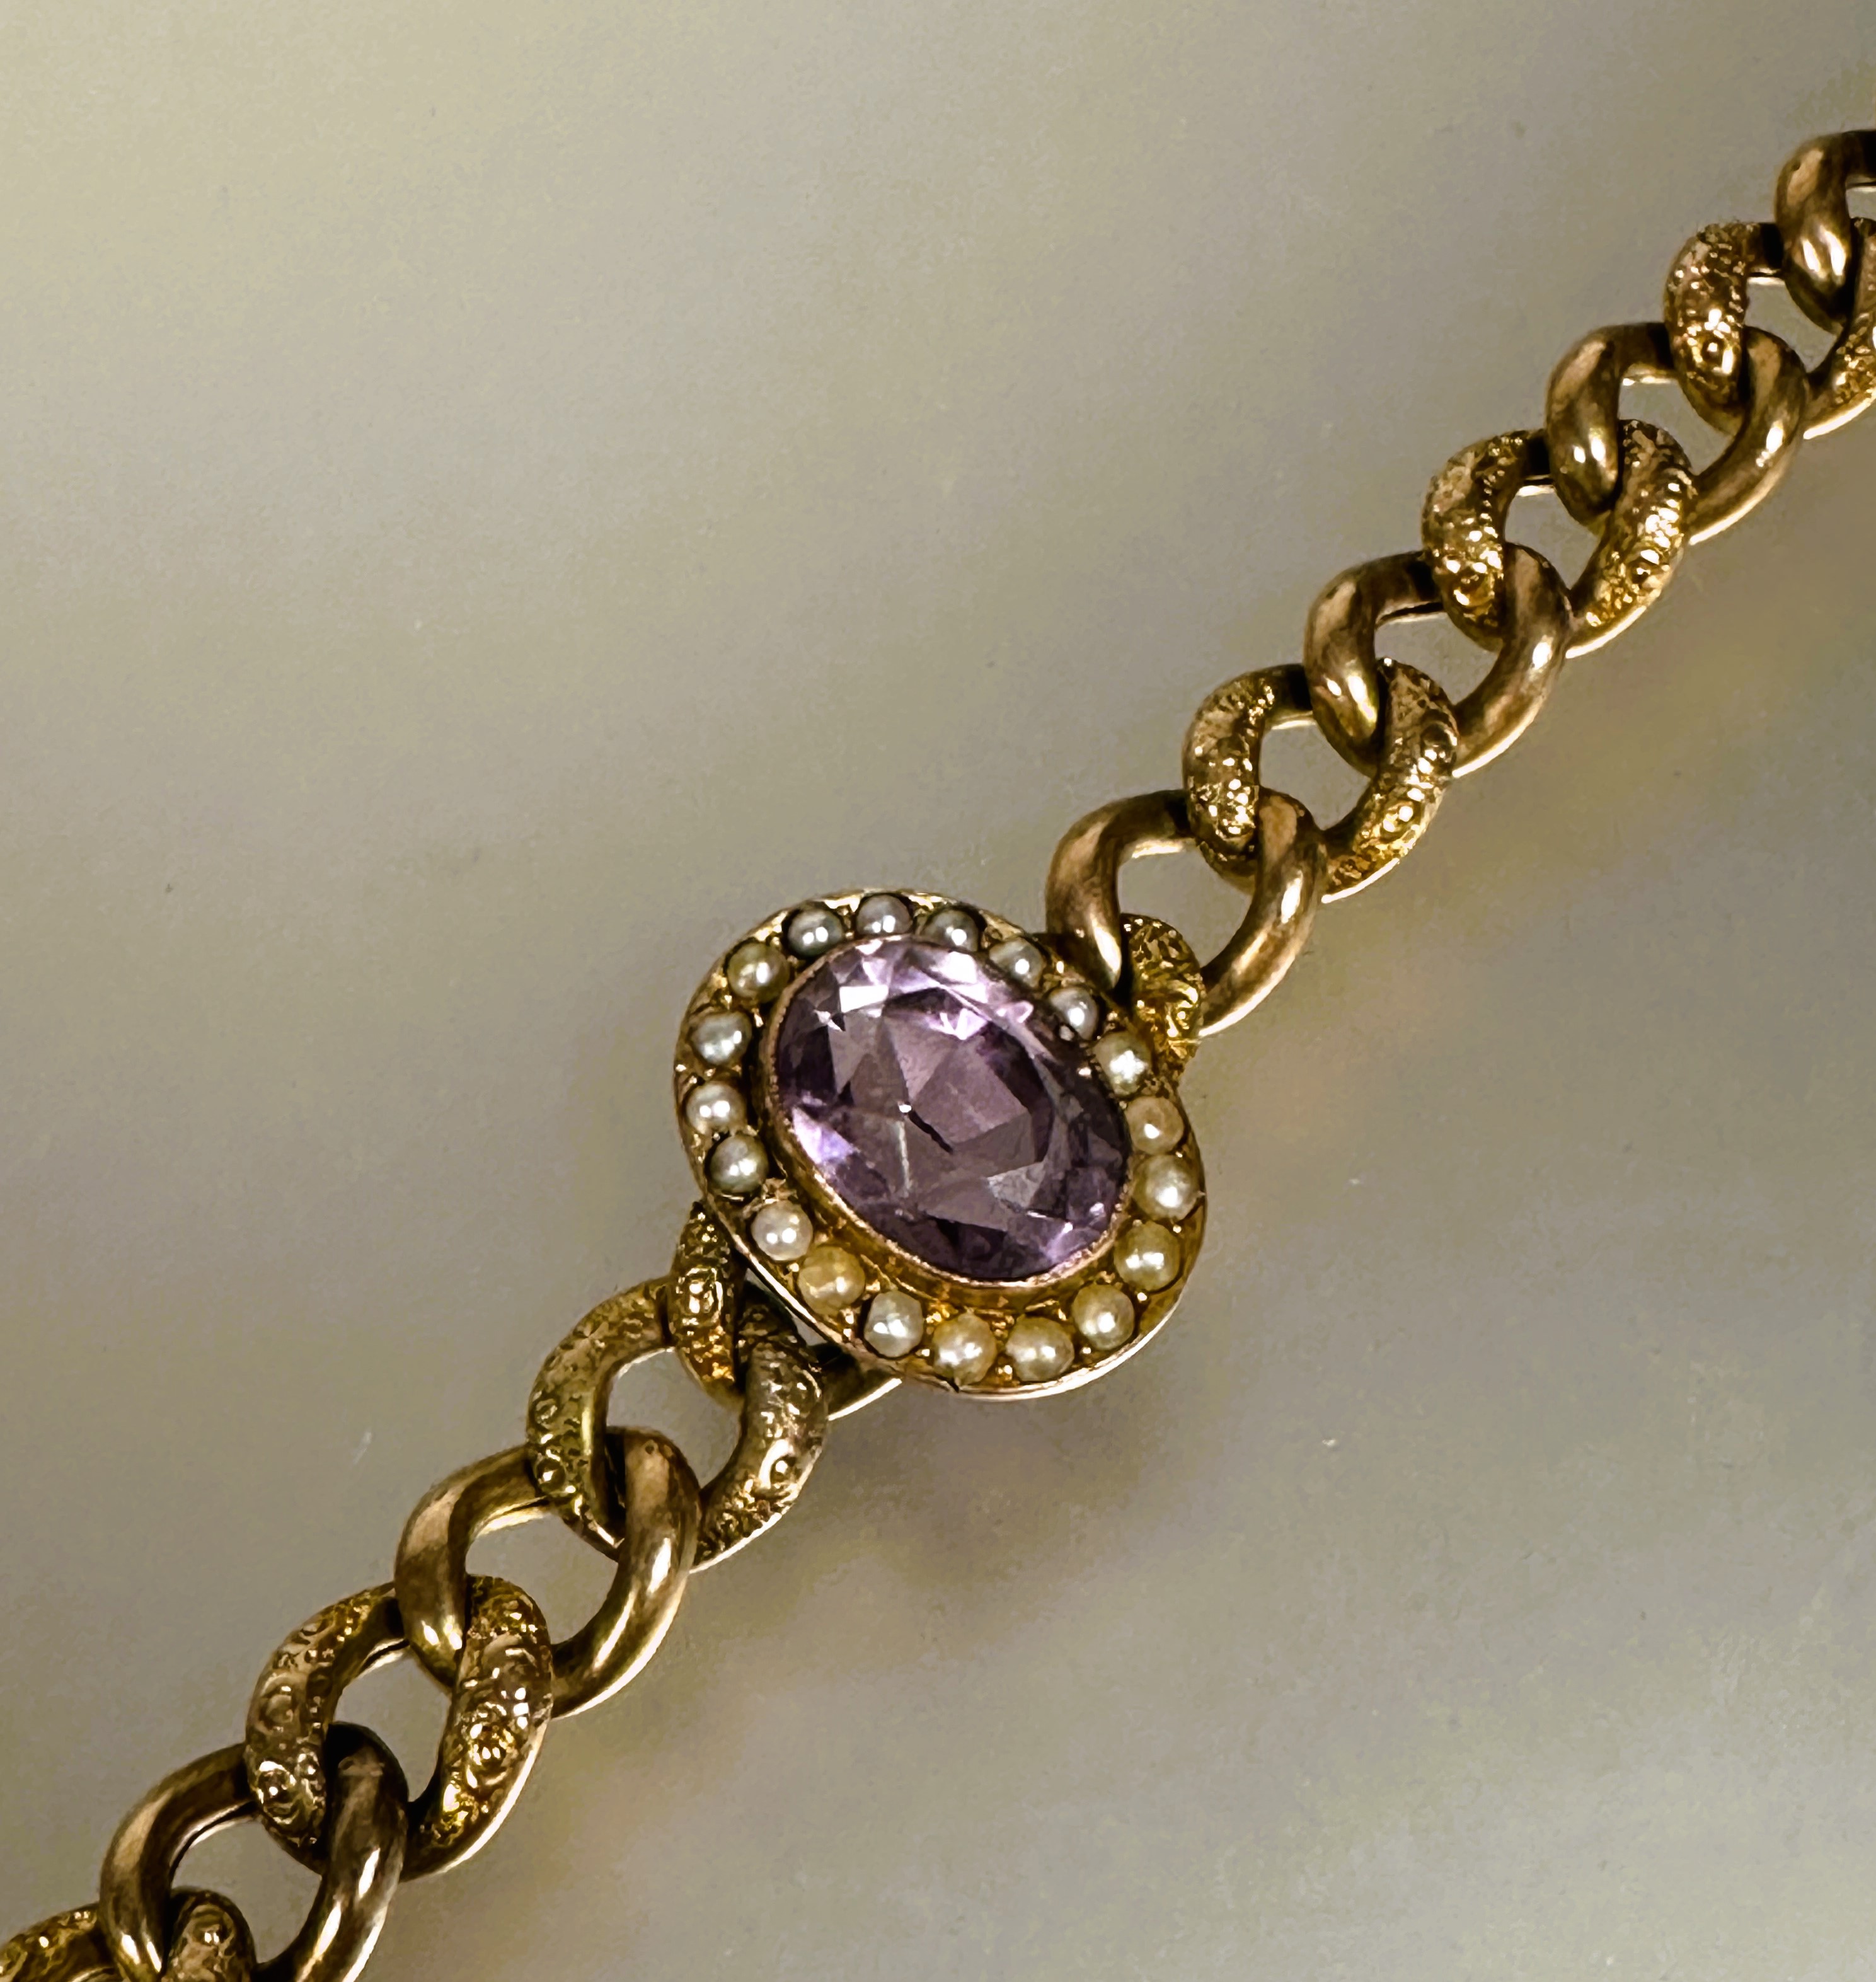 A late 19thc 9ct gold engraved kerb link chain bracelet with clasp fastening and safety chain - Image 2 of 5